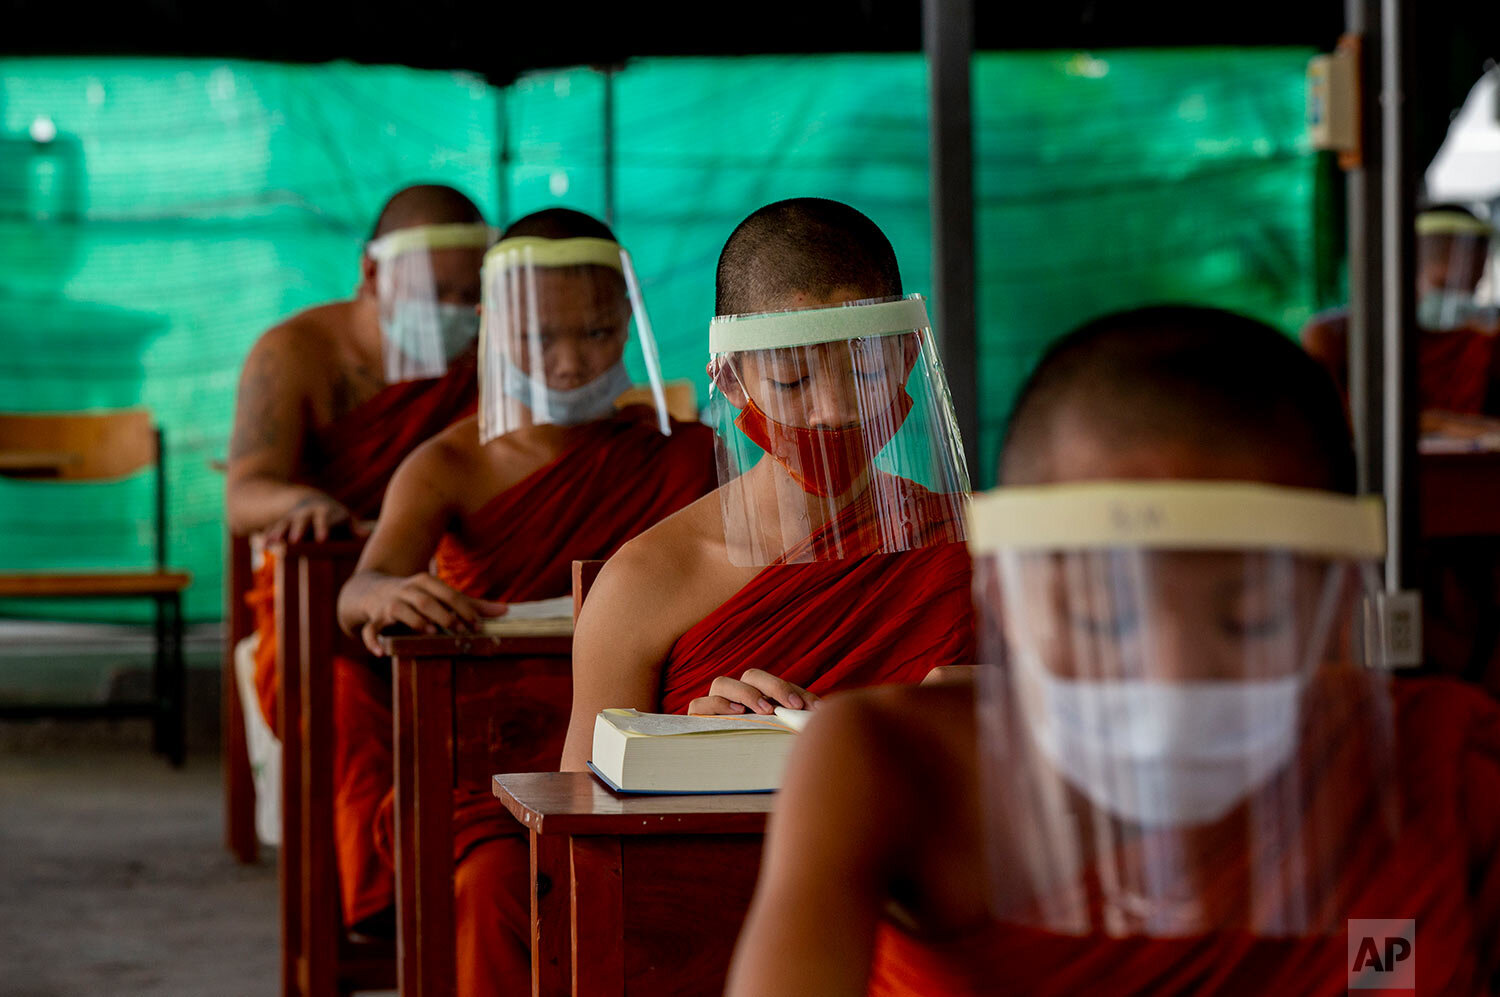  Novice Buddhist monks with protective masks and face shields, seated maintaining social distancing participate in a religious class at Molilokayaram Educational Institute in Bangkok, Thailand, Wednesday, April 15, 2020.  (AP Photo/Gemunu Amarasinghe